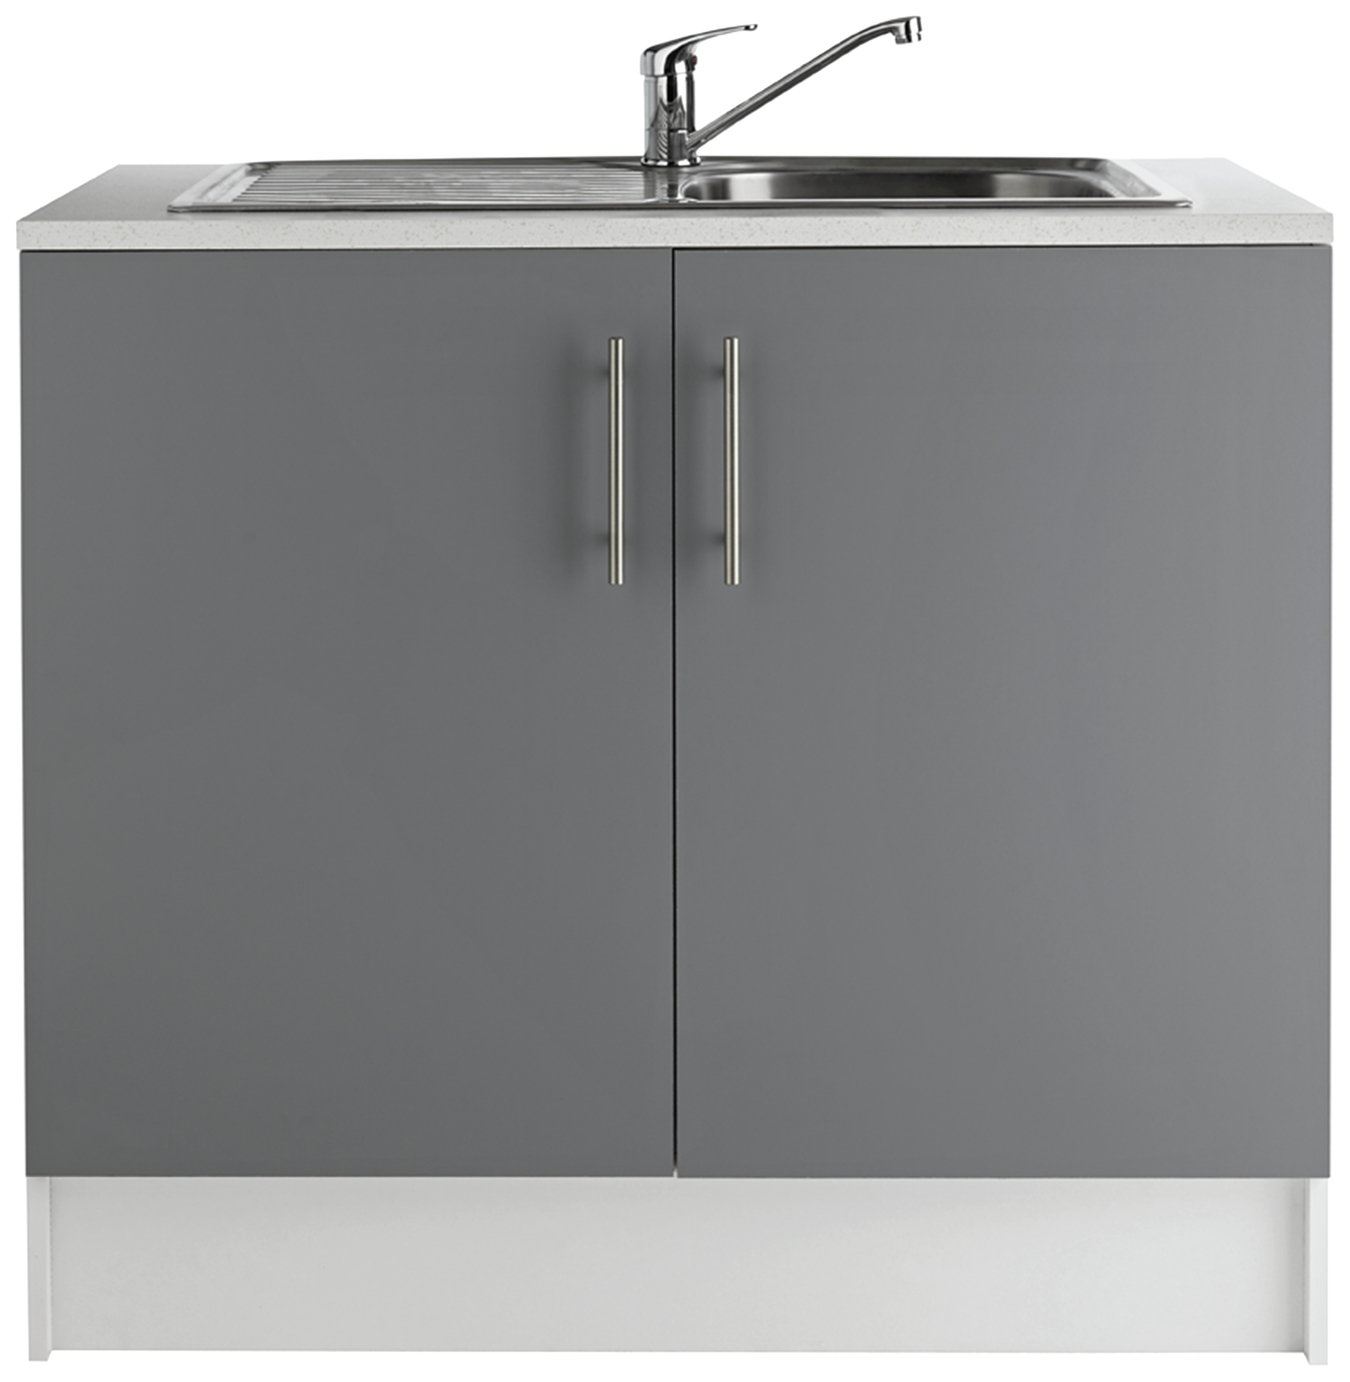 Argos Home Athina 1000mm S. Steel Kitchen Sink Unit review